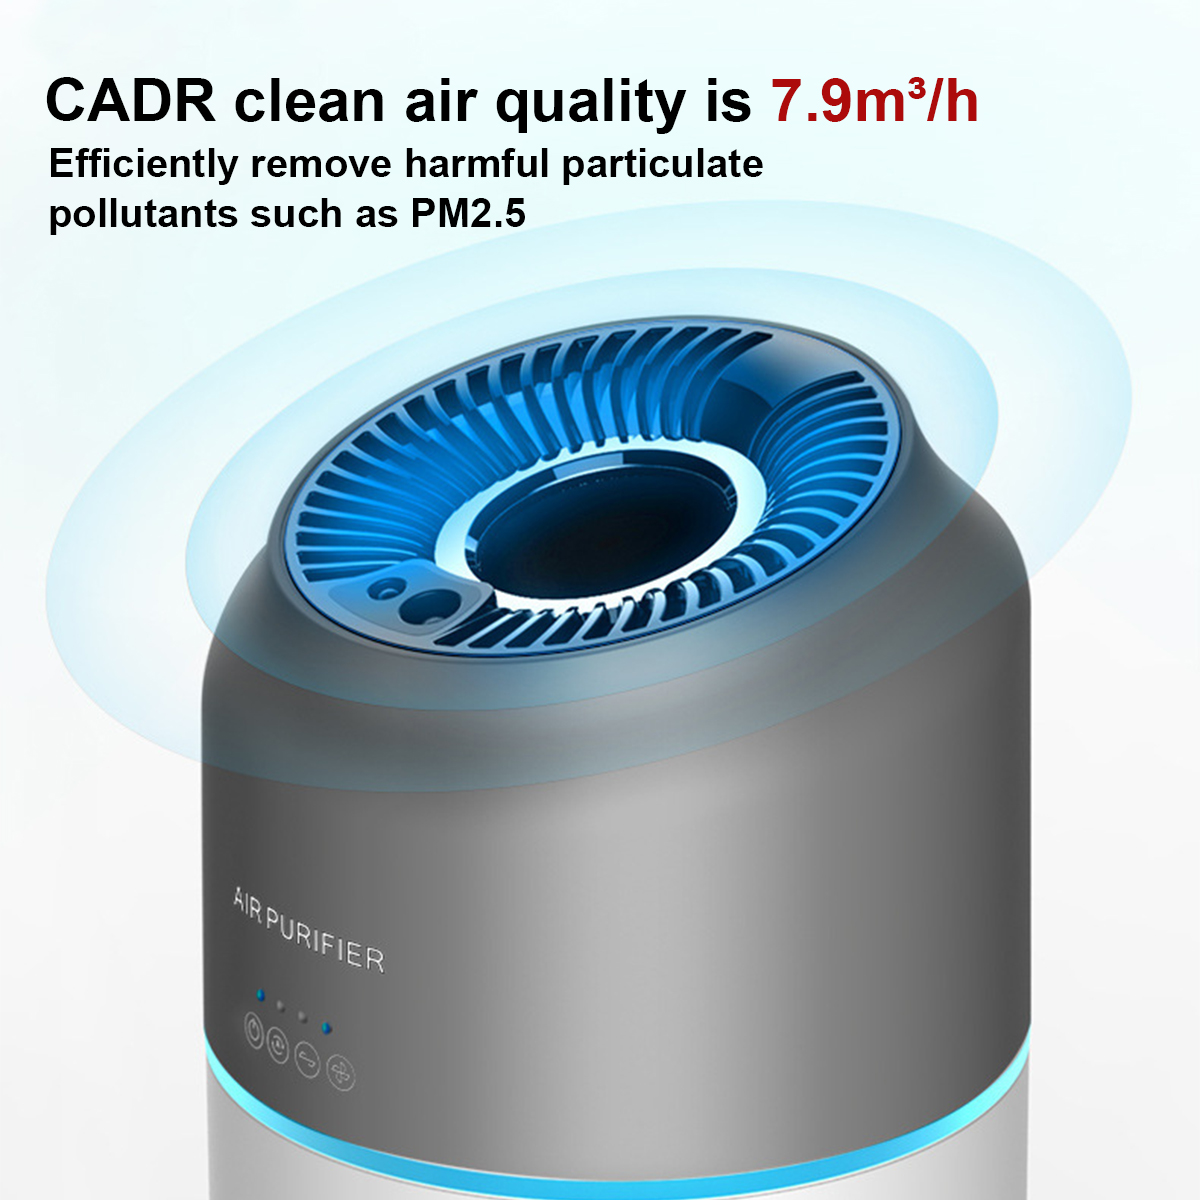 5V-Air-Purifier-2-Gear-Wind-Speed-79msup3h-Remove-PM25-Hand-Gesture-Infrared-Sensor-Low-Noise-for-Ho-1755462-3